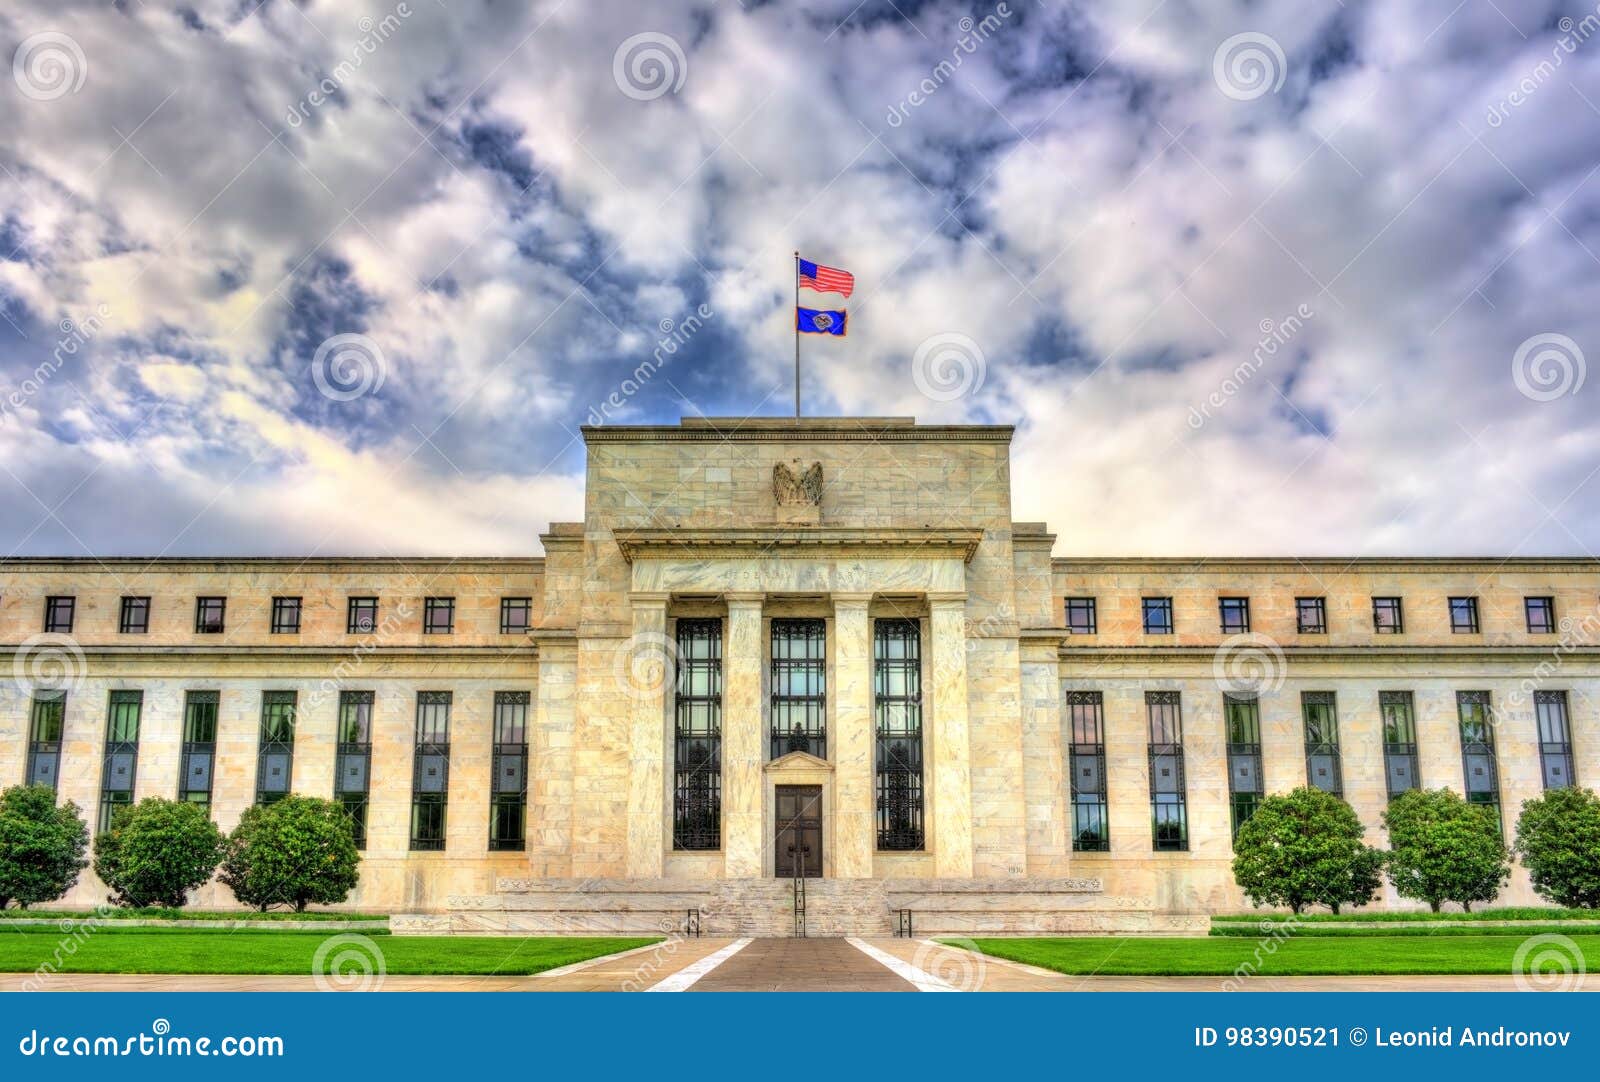 federal reserve board of governors in washington, d.c.